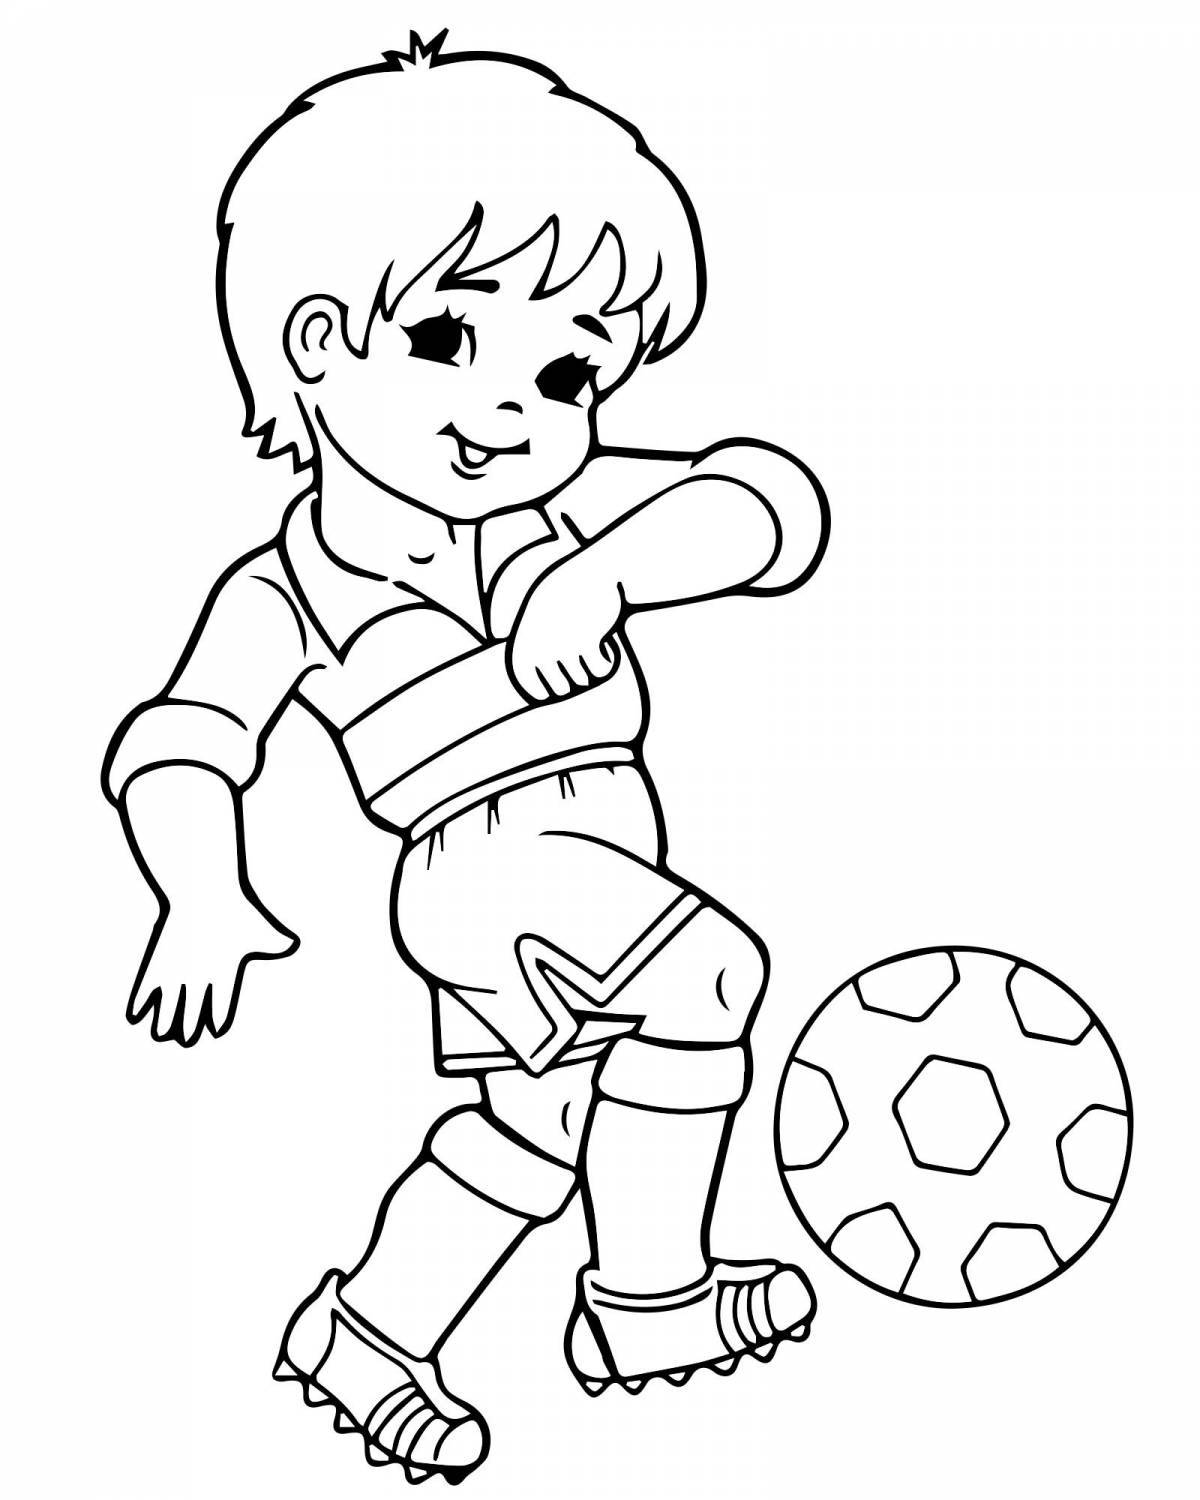 Coloring live football player